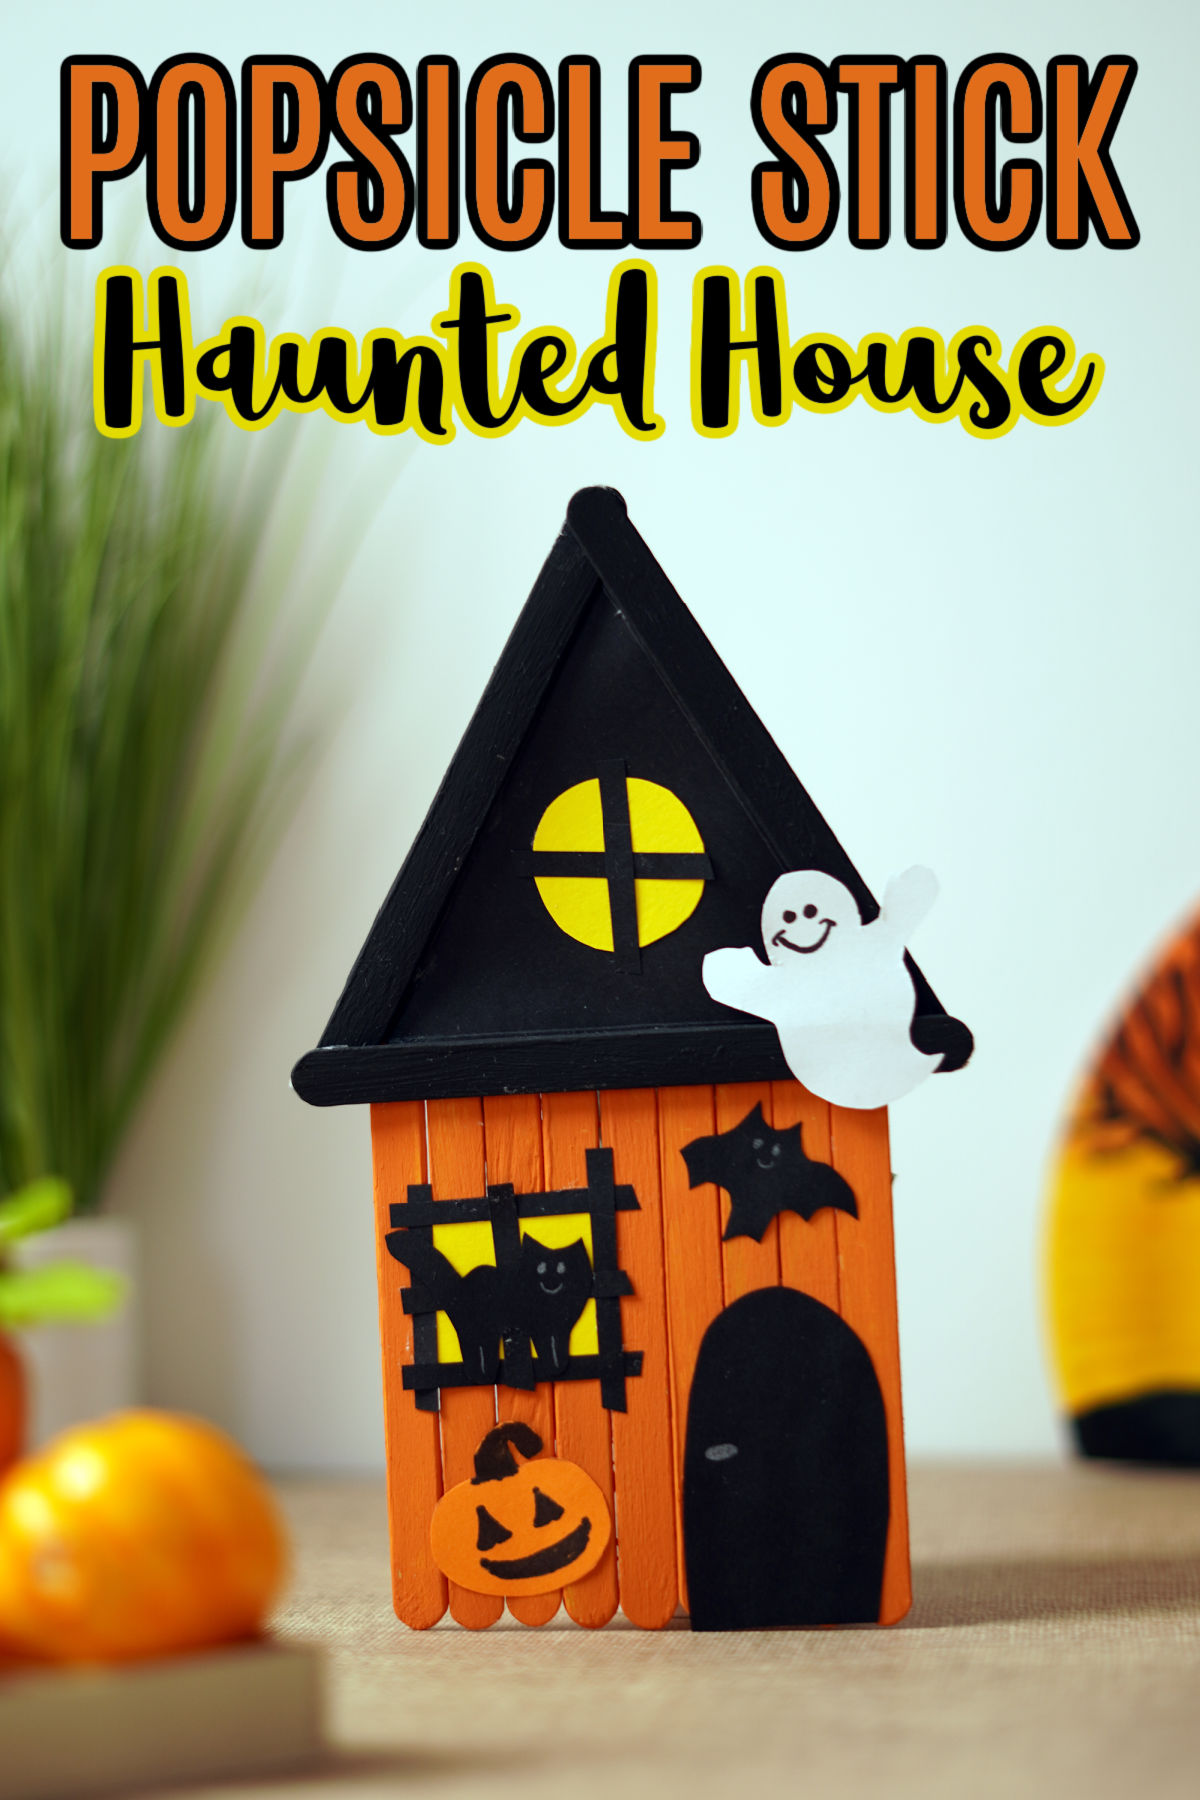 Finished results for a popsicle stick haunted house craft